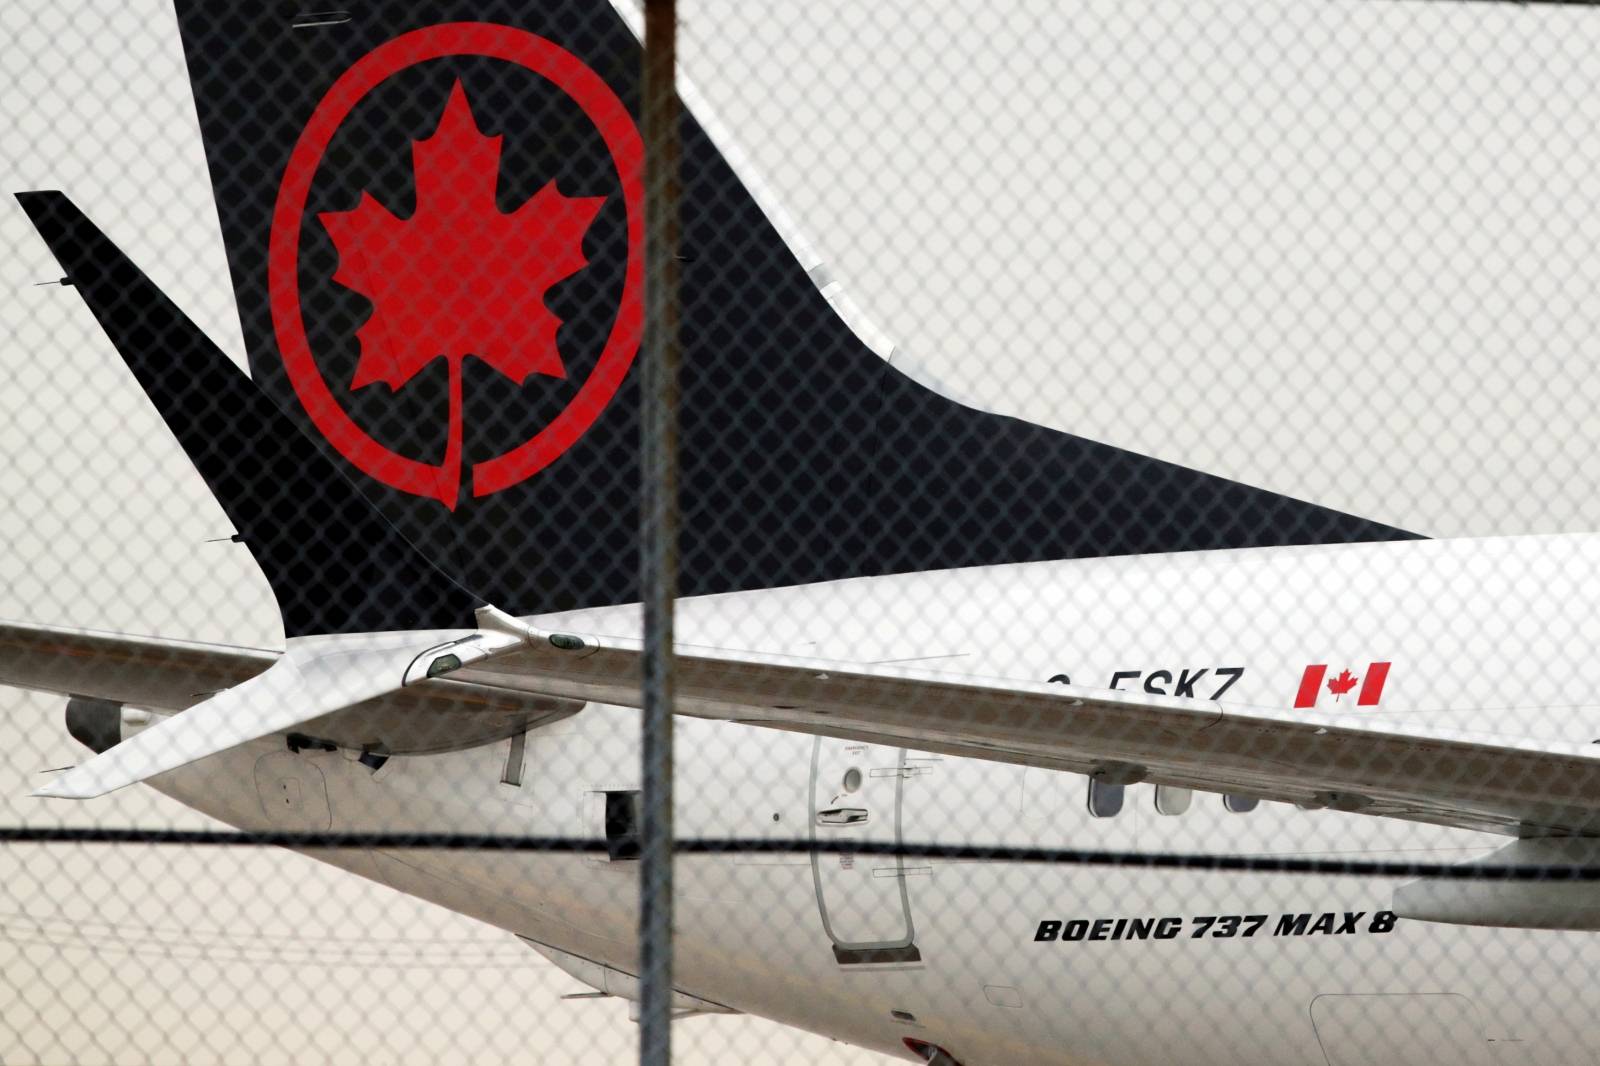 FILE PHOTO: An Air Canada Boeing 737 MAX 8 aircraft on the ground at Toronto Pearson International Airport